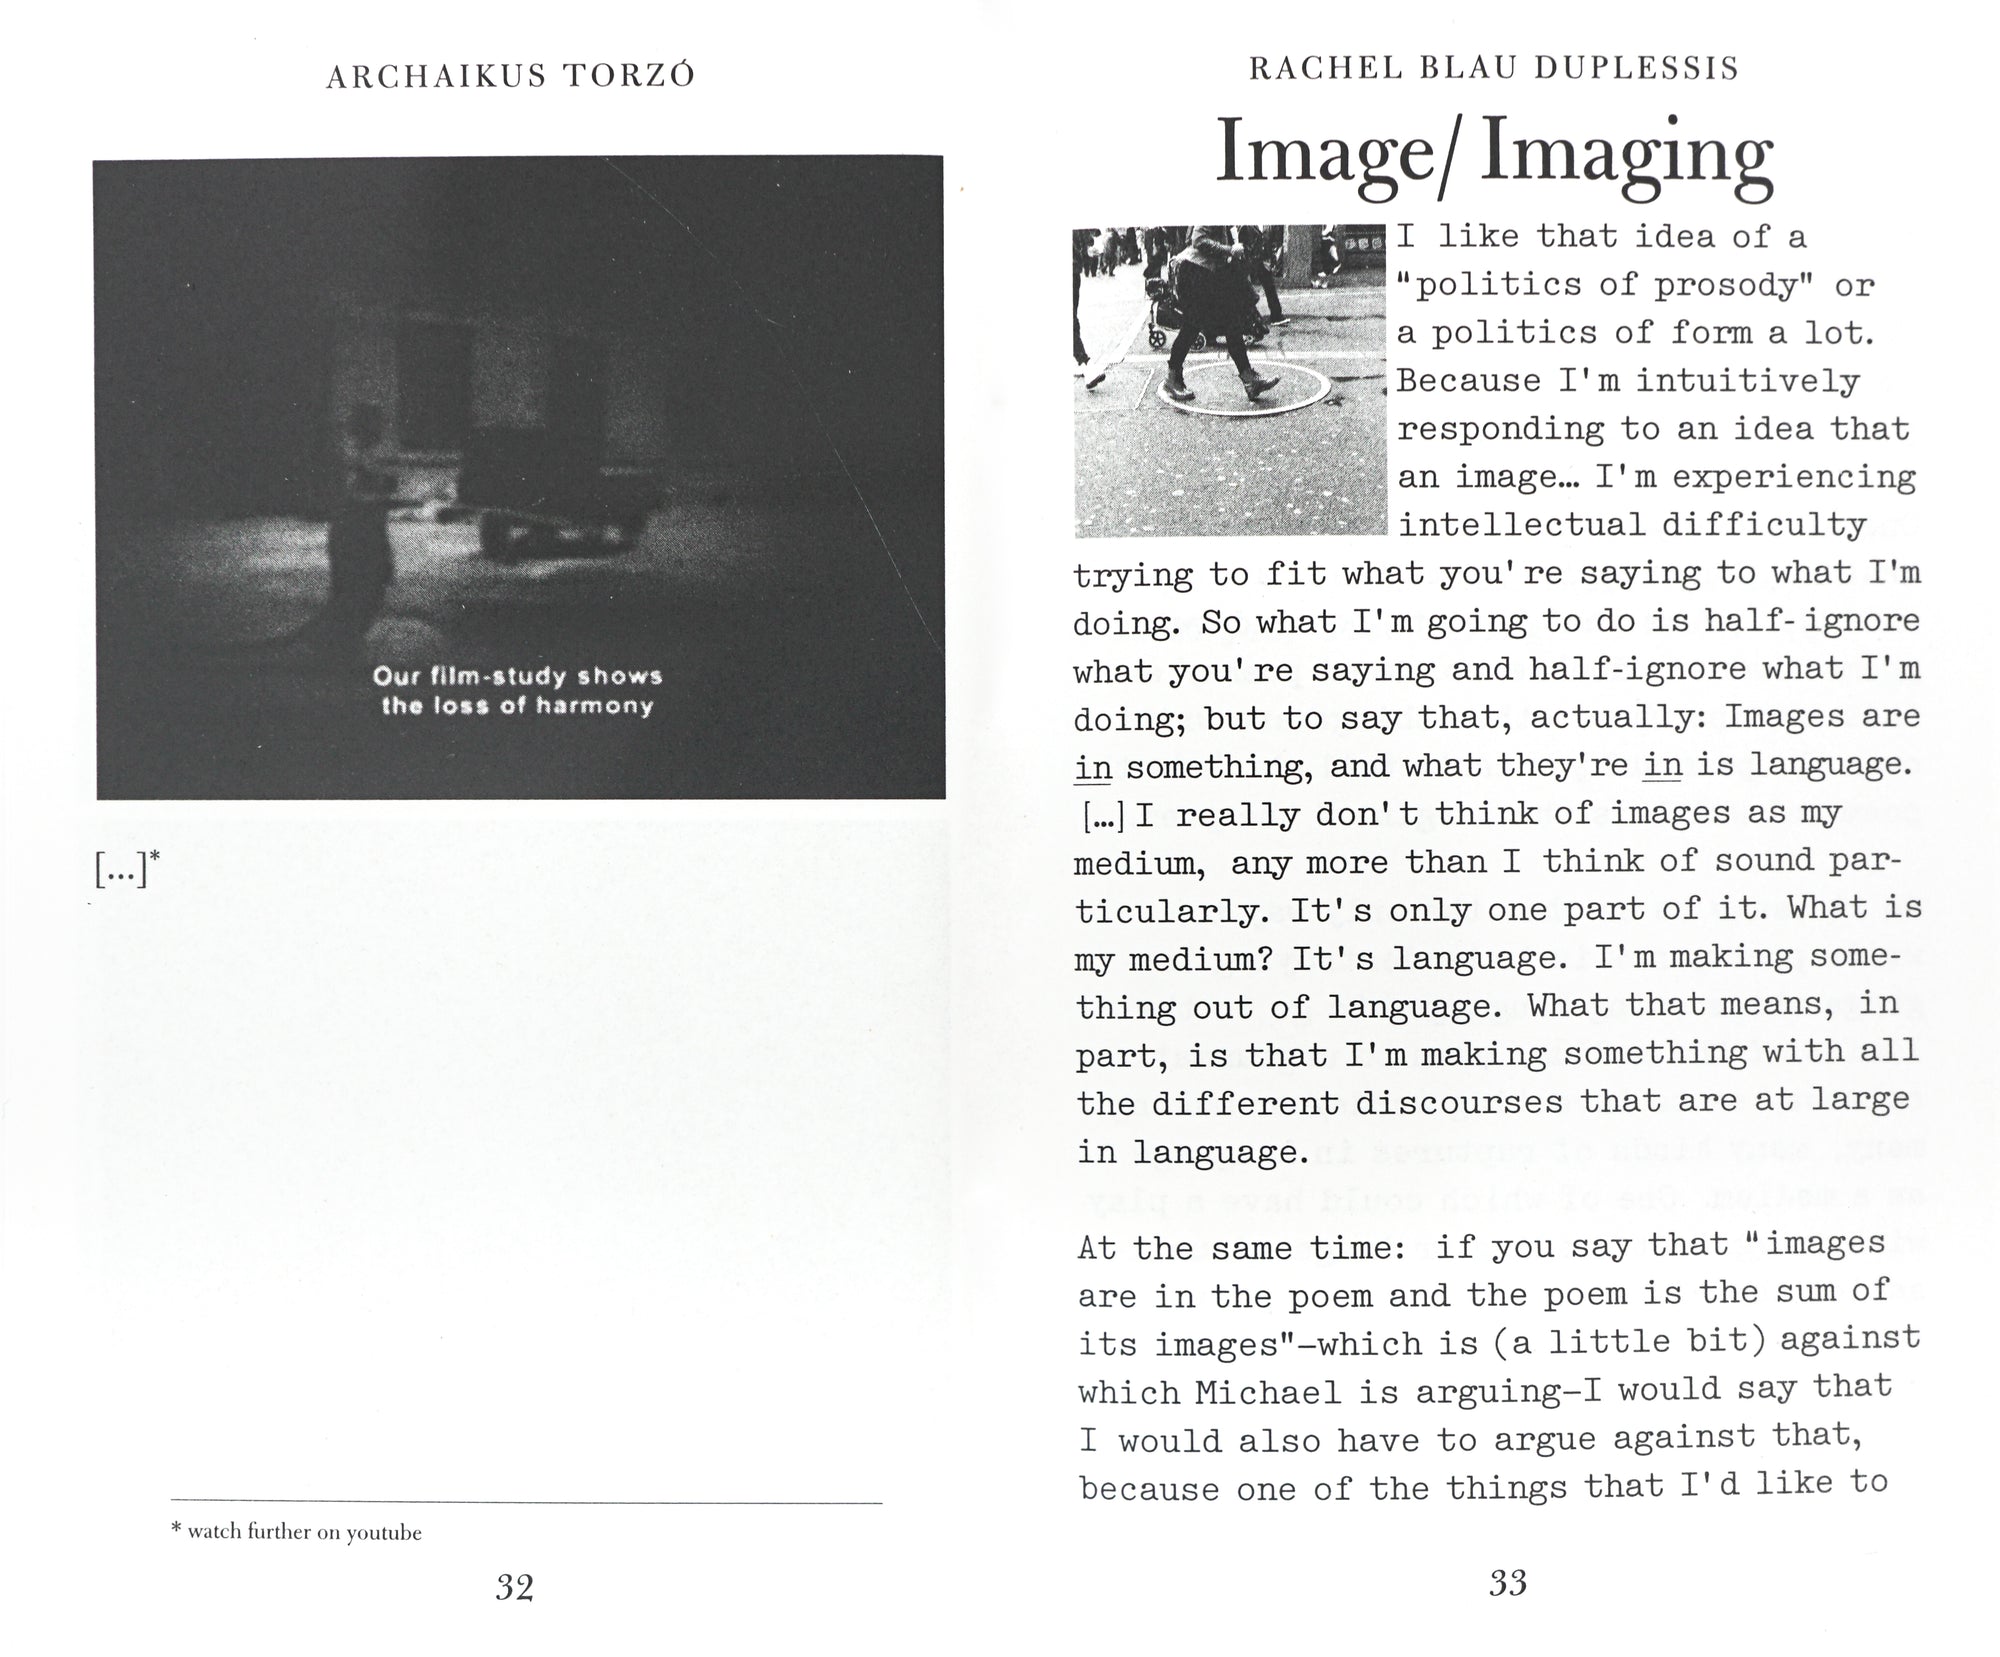 Spread from the book with a film still on the left side, and an essay by Rachel Blau Duplessis on the right.